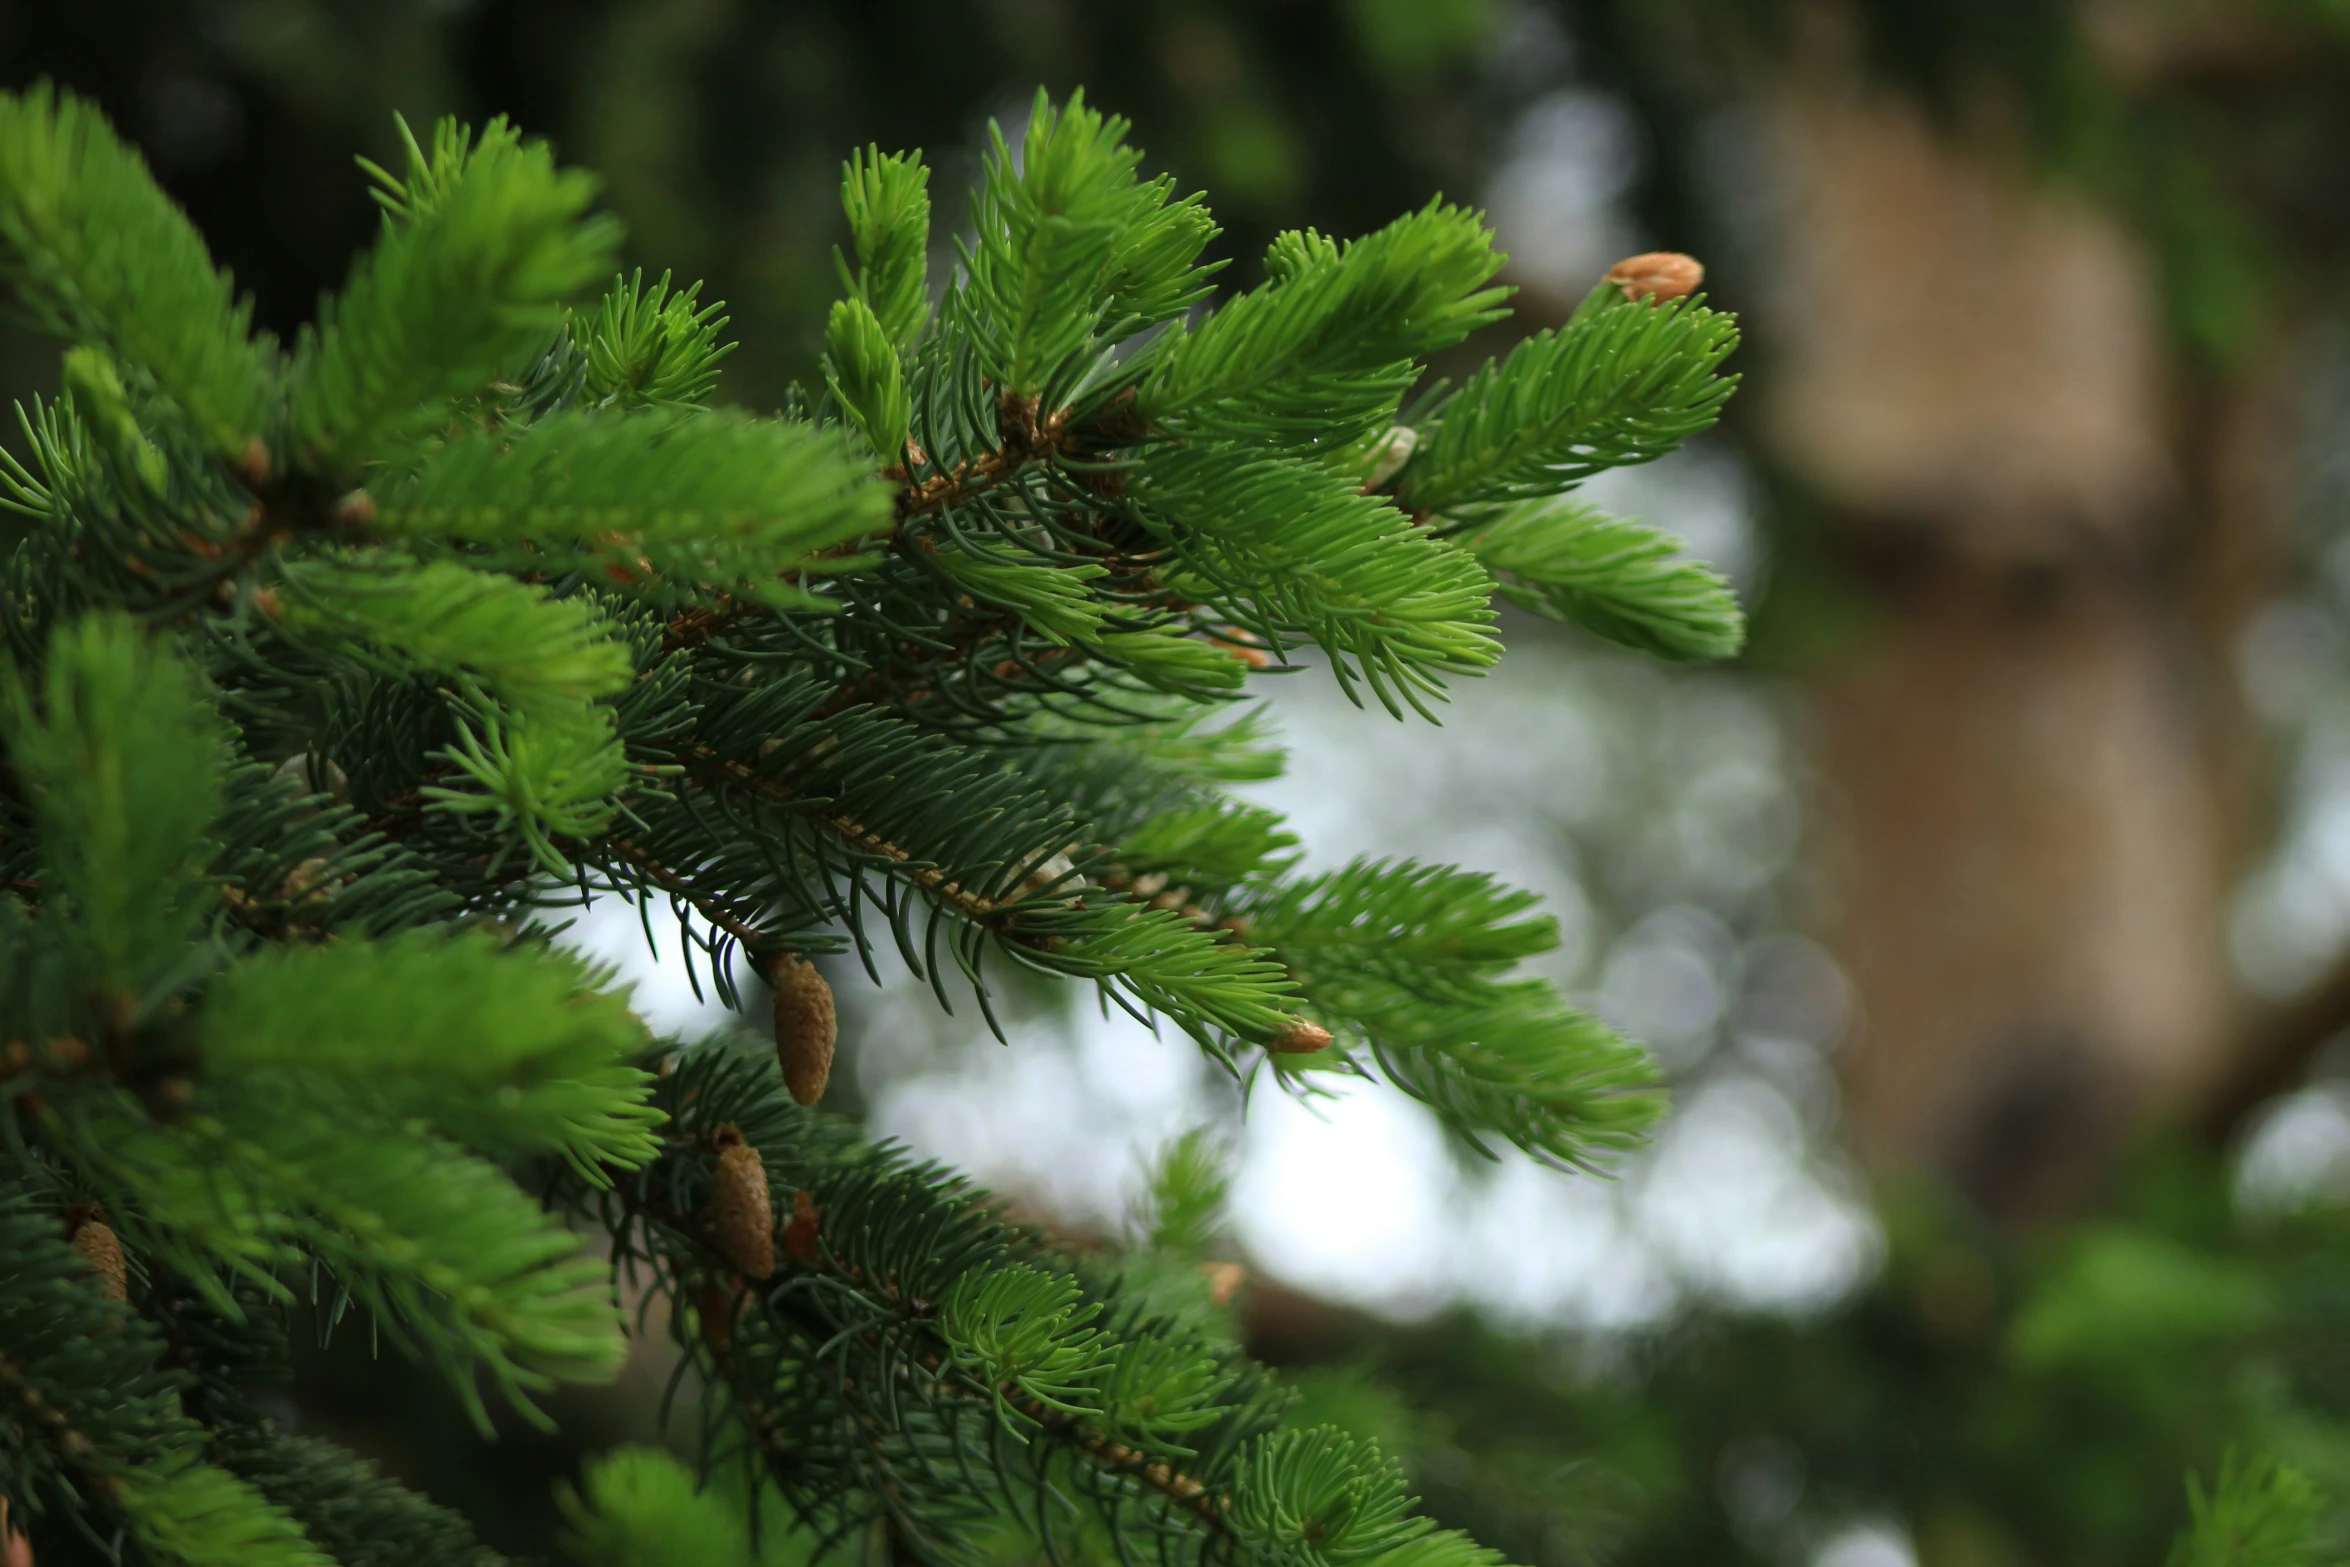 the needles and nches of a pine tree